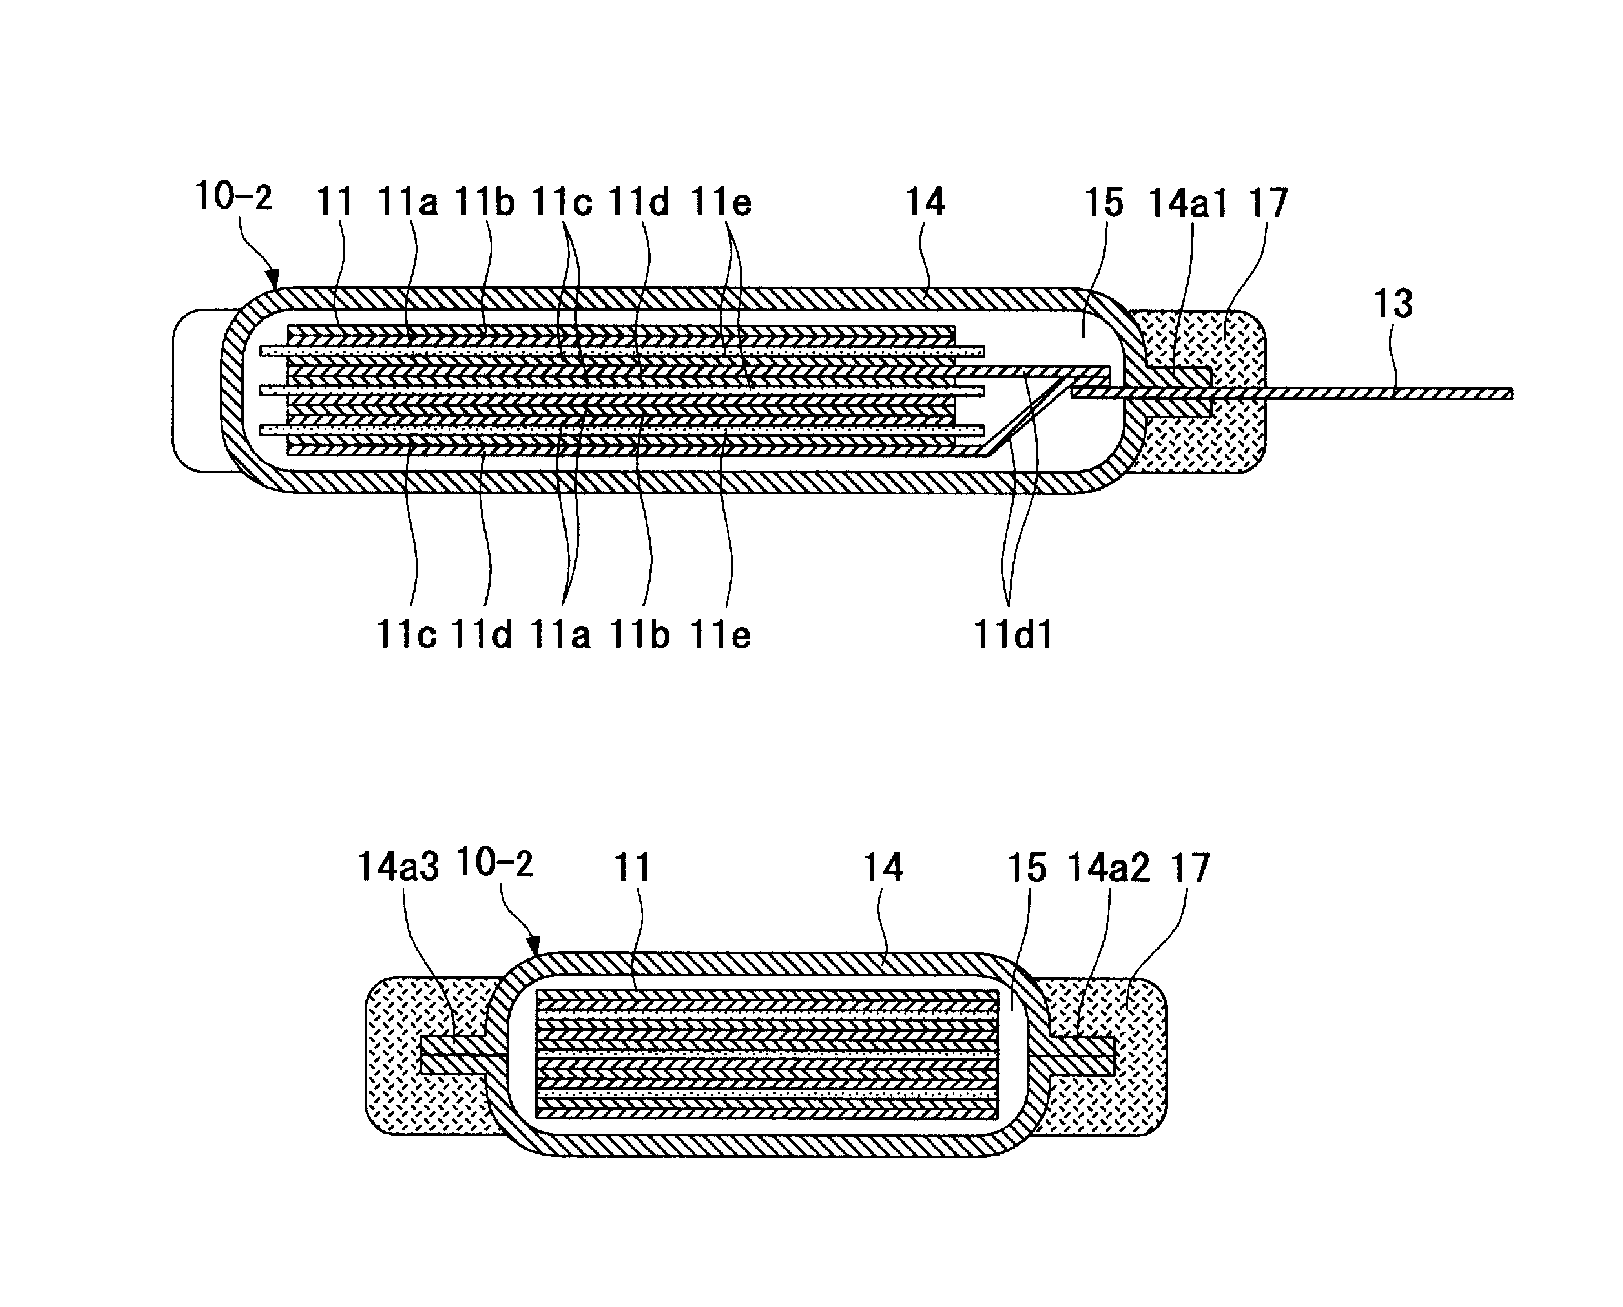 Electrochemical device